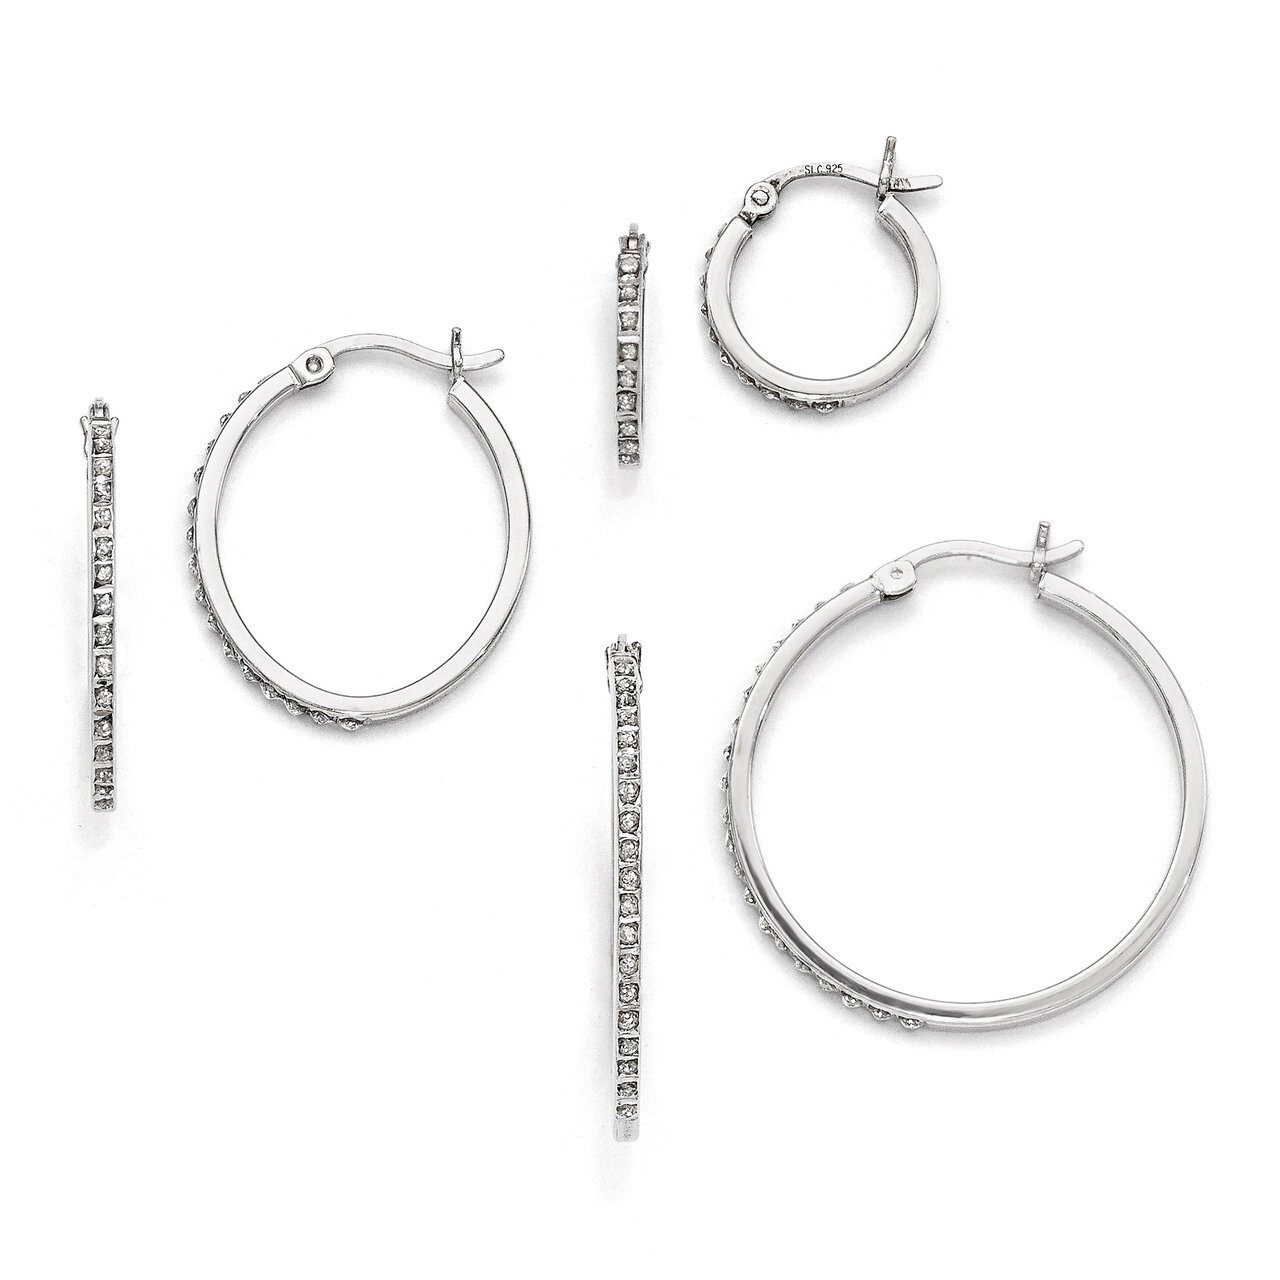 Mystique Oval & Round Hoop Earrings Set Sterling Silver with Diamonds QDF103